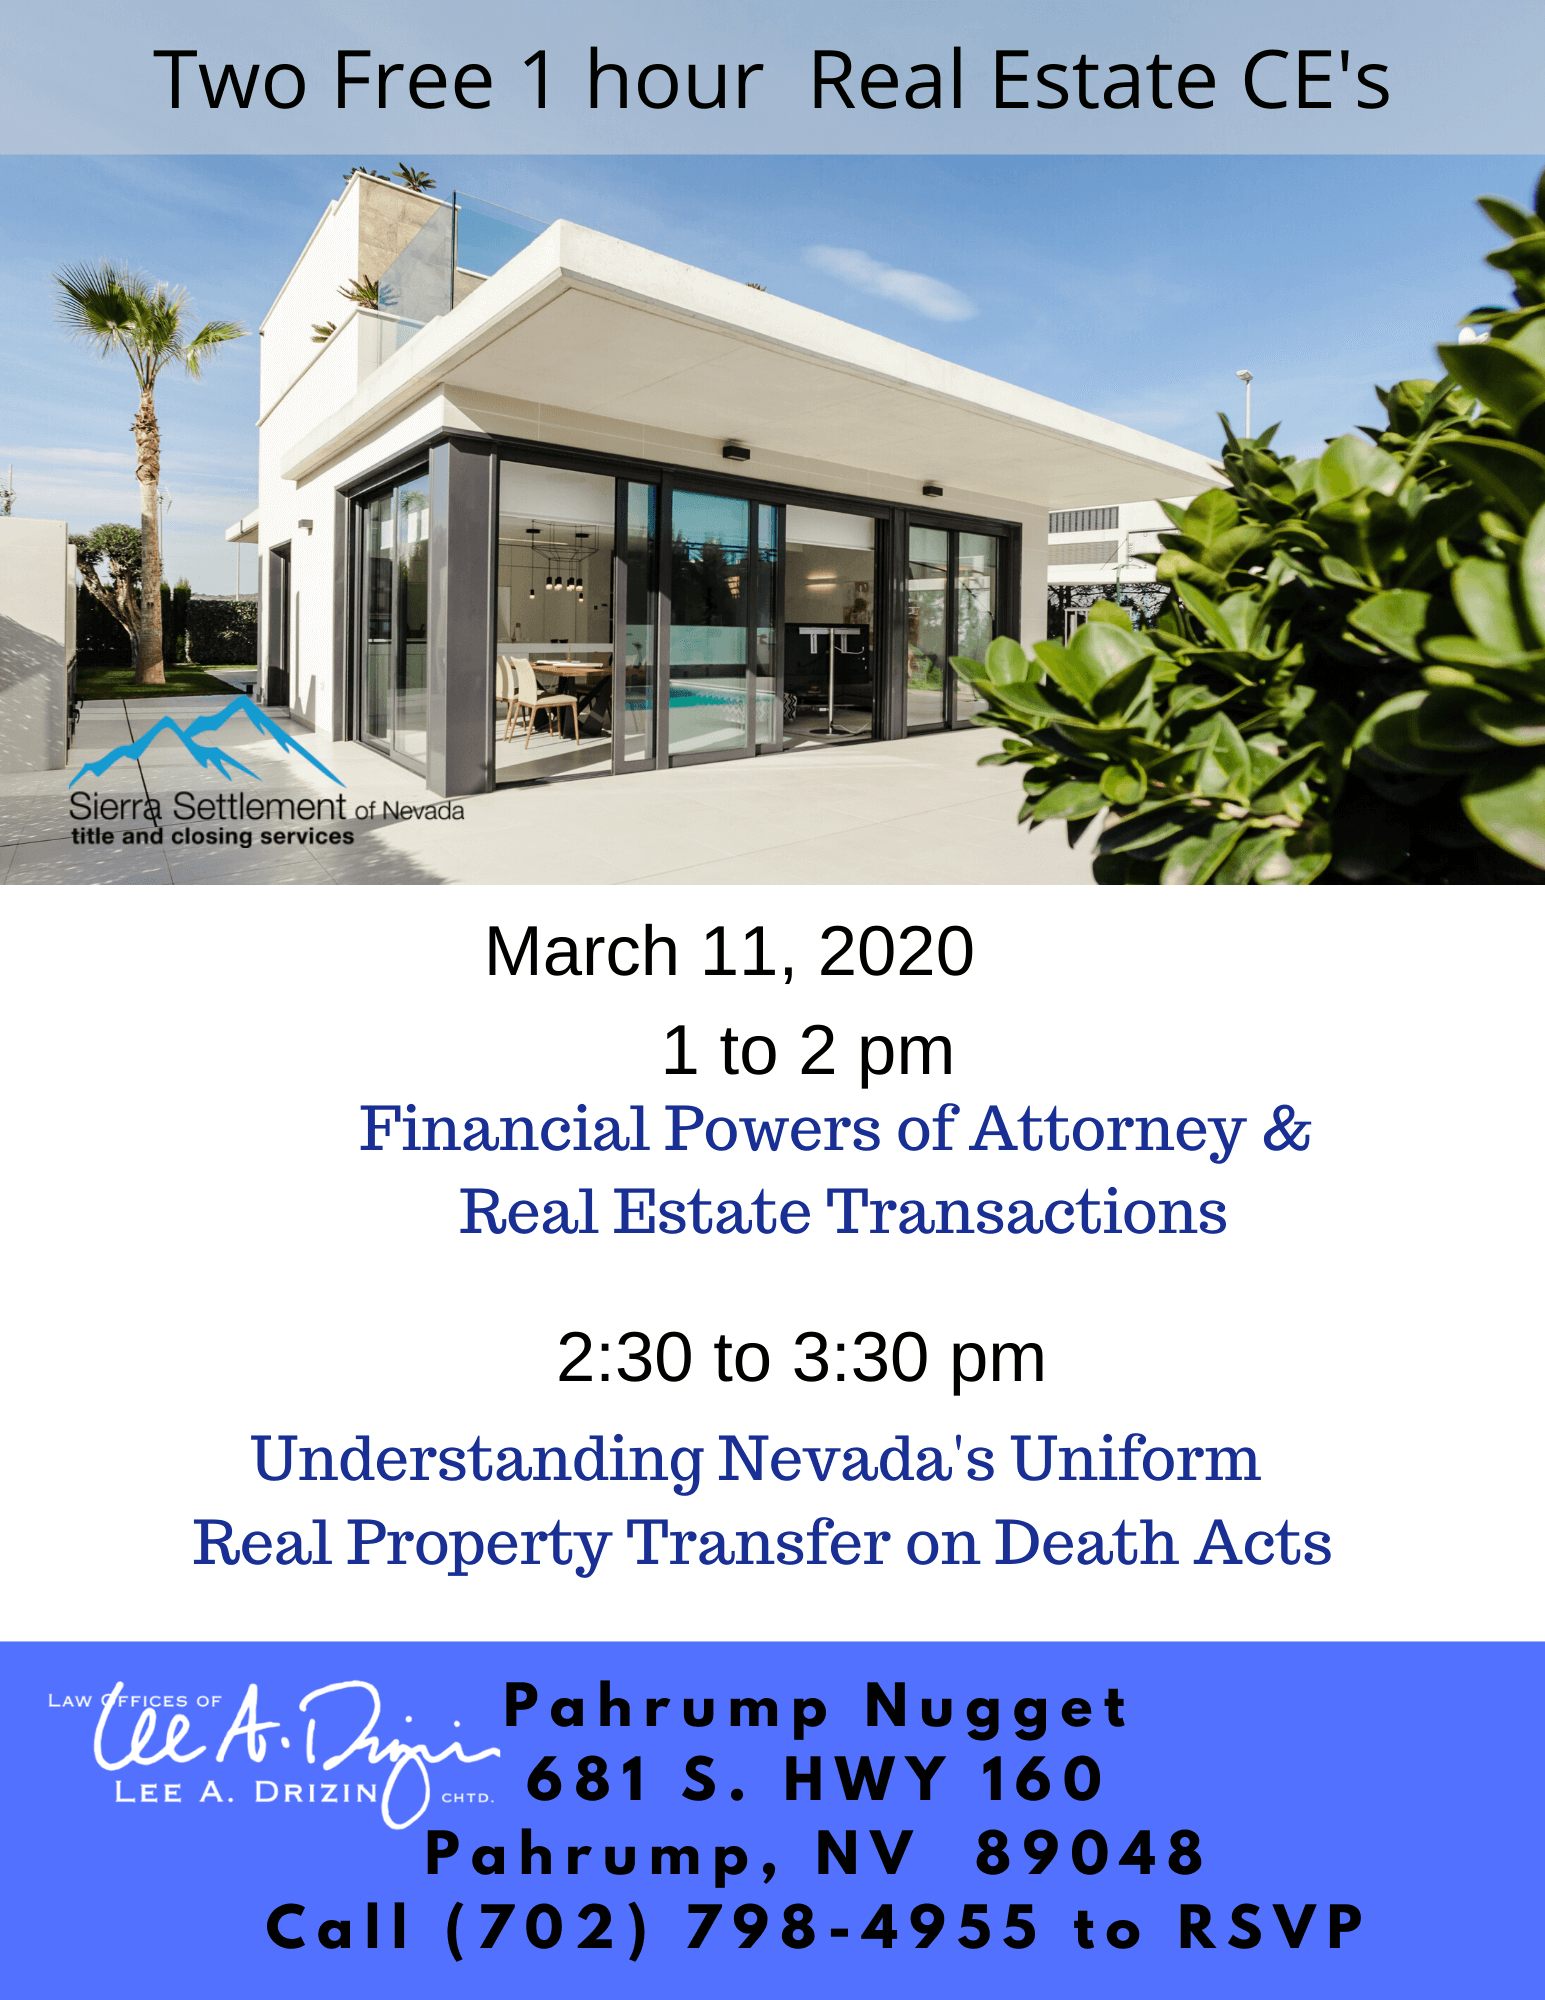 2 Free CE's in Pahrump - March 11, 2020